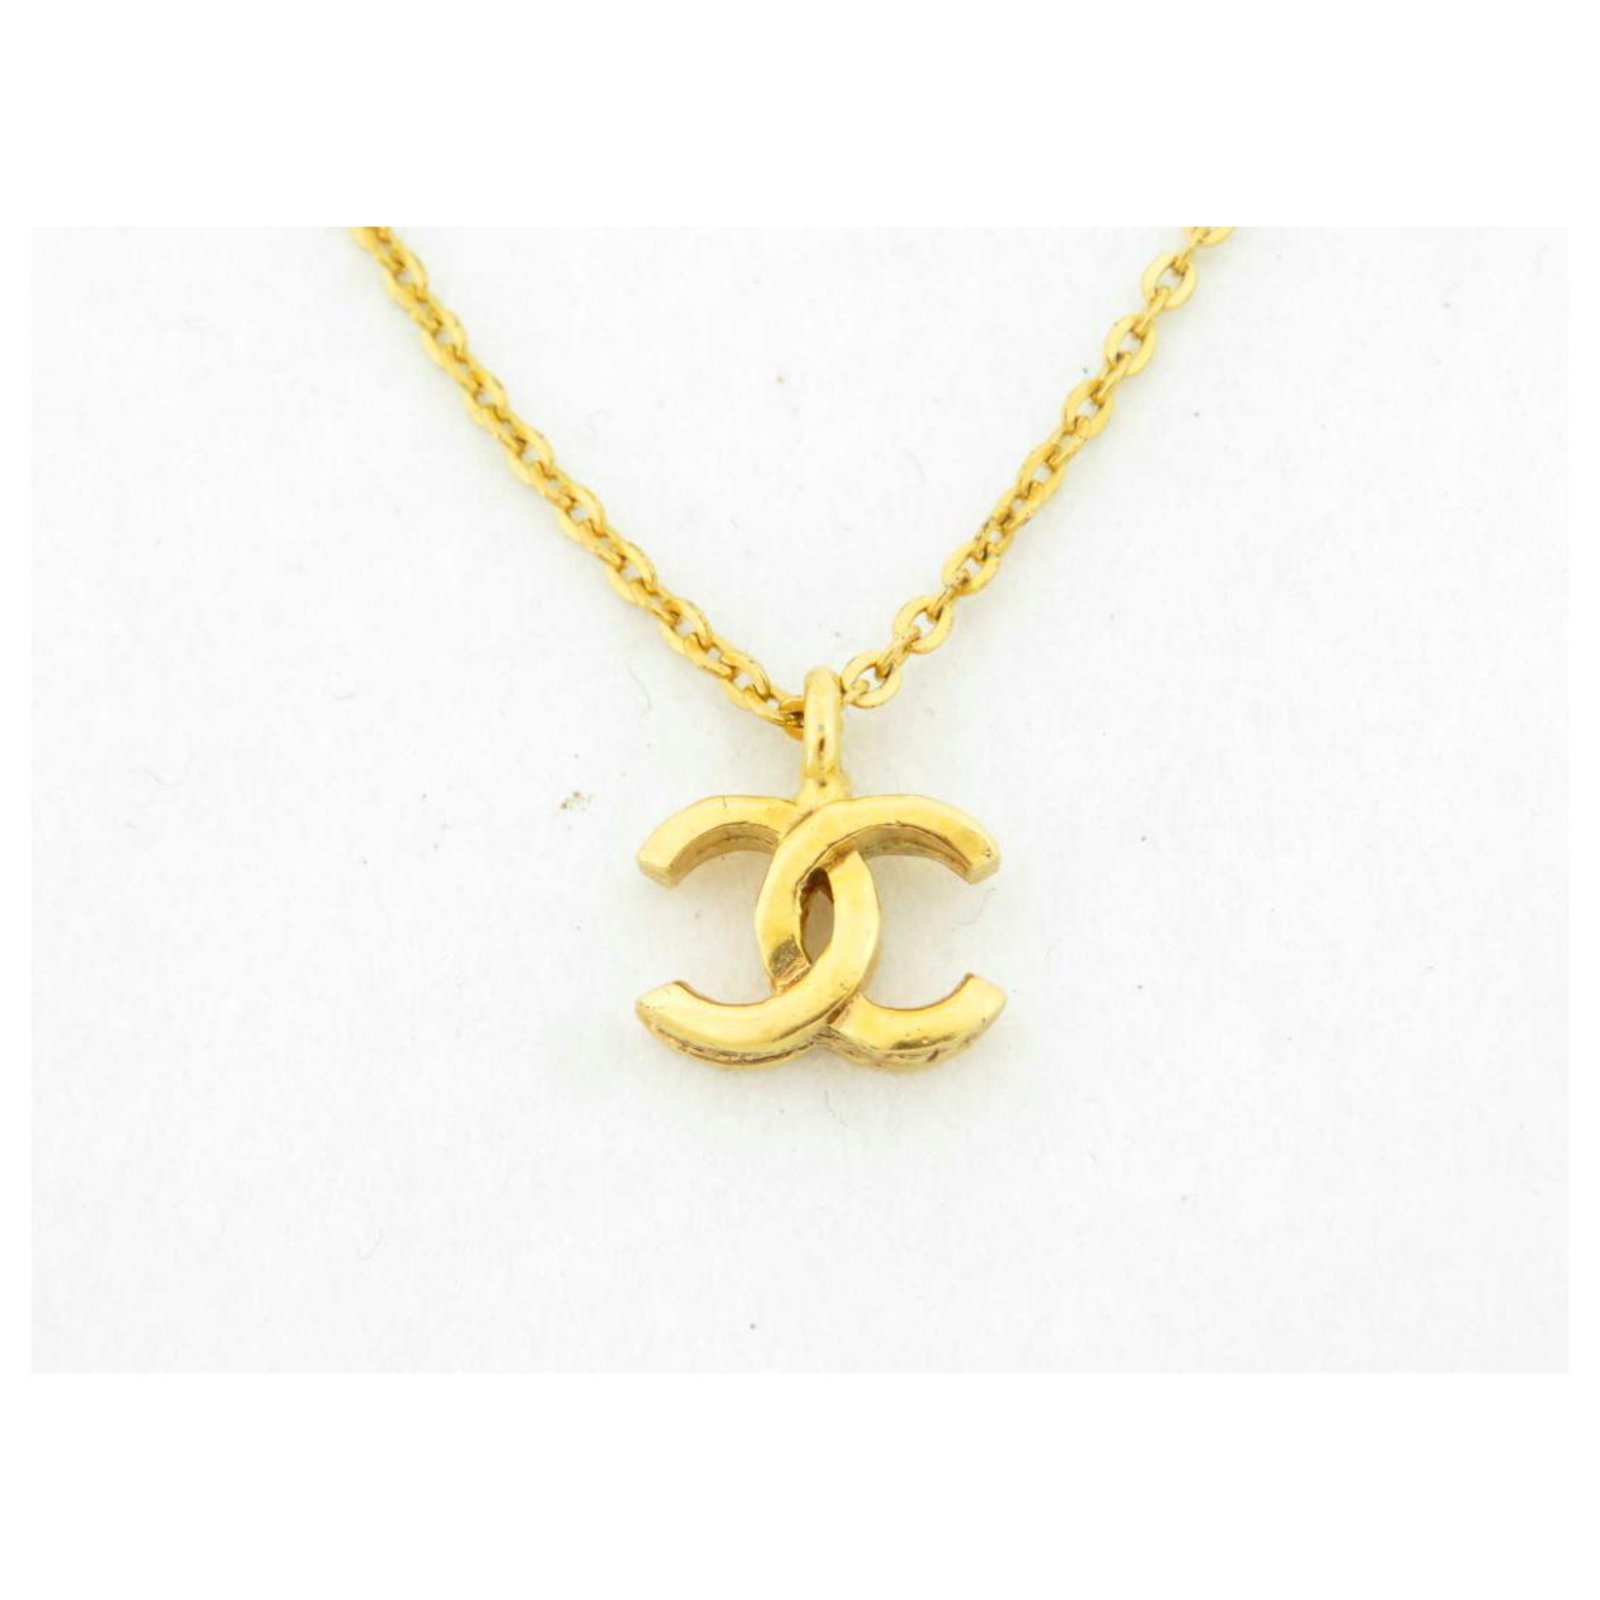 Chanel Vintage Gold Quilted CC Logo Pendant Necklace  Gold chanel Vintage  chanel Chanel pendant